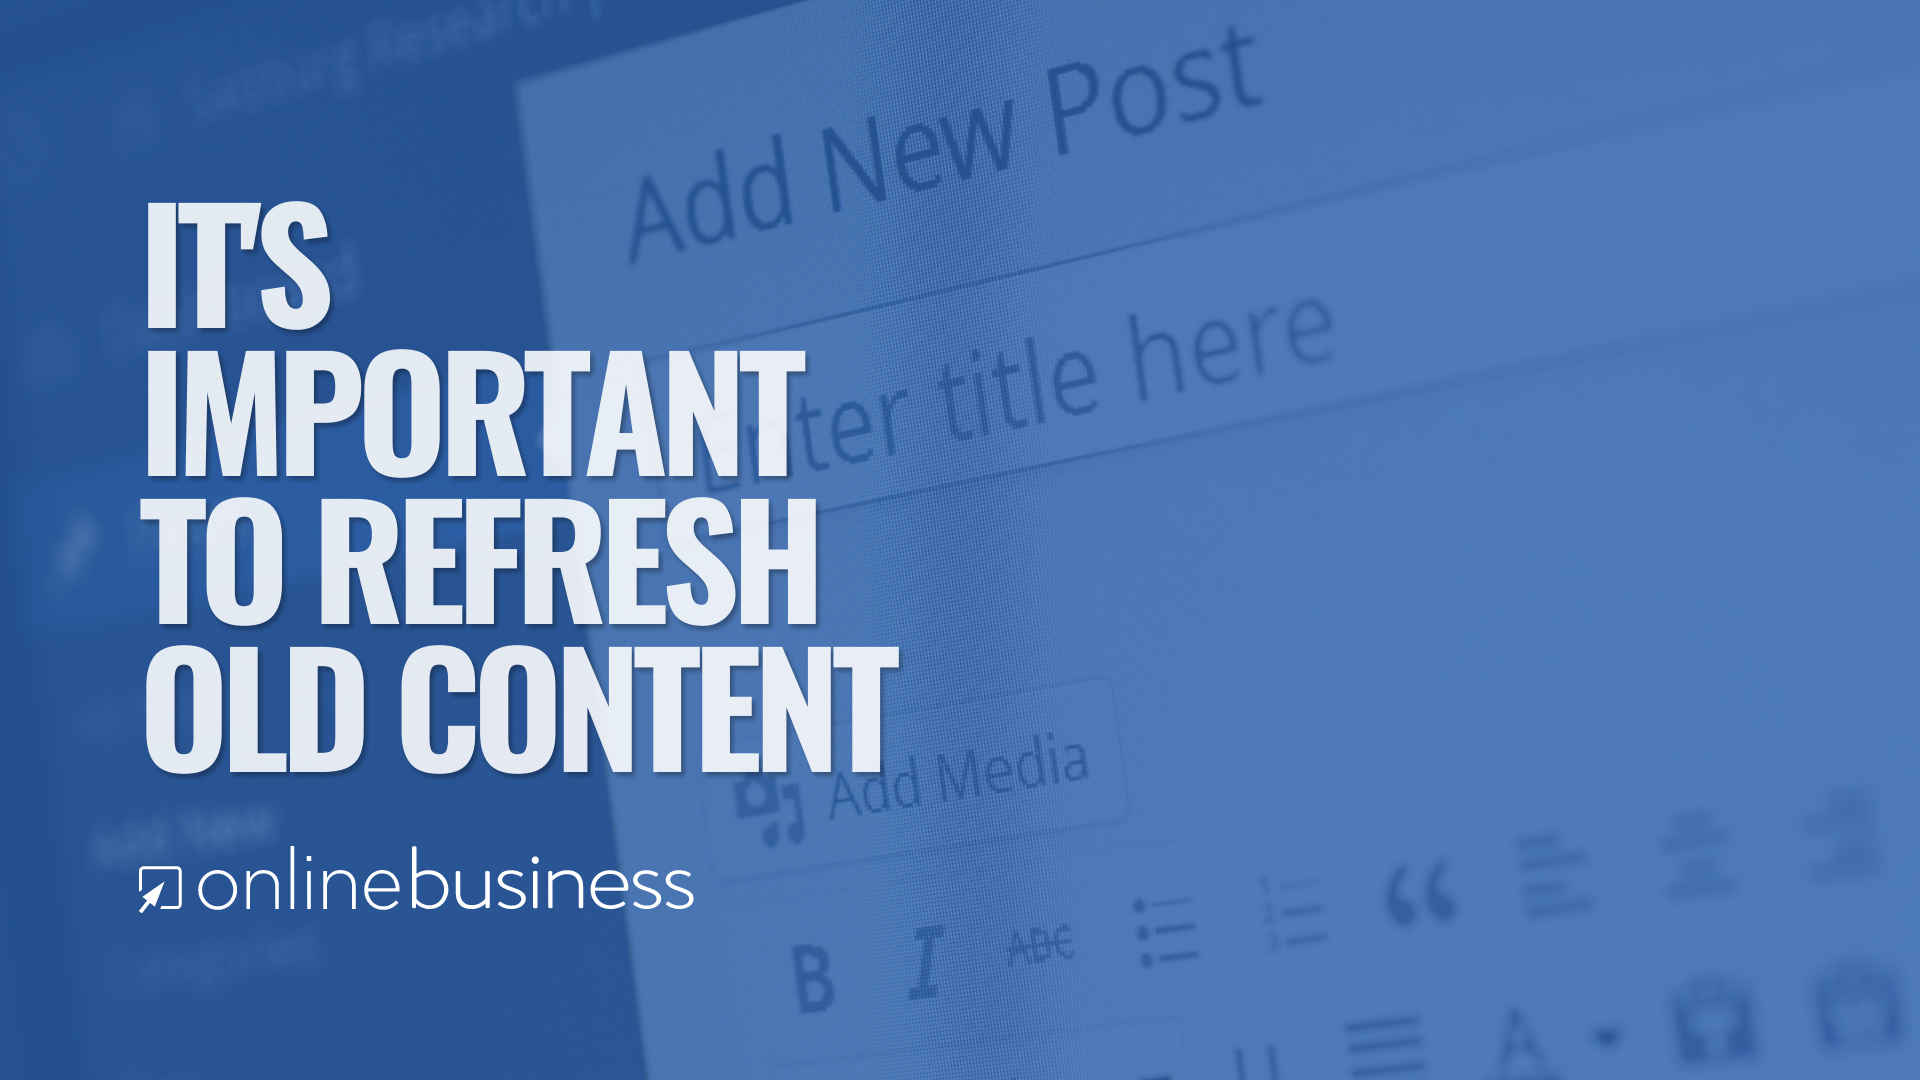 OnlineBusiness.com Explains Why It's Important to Refresh Old Content